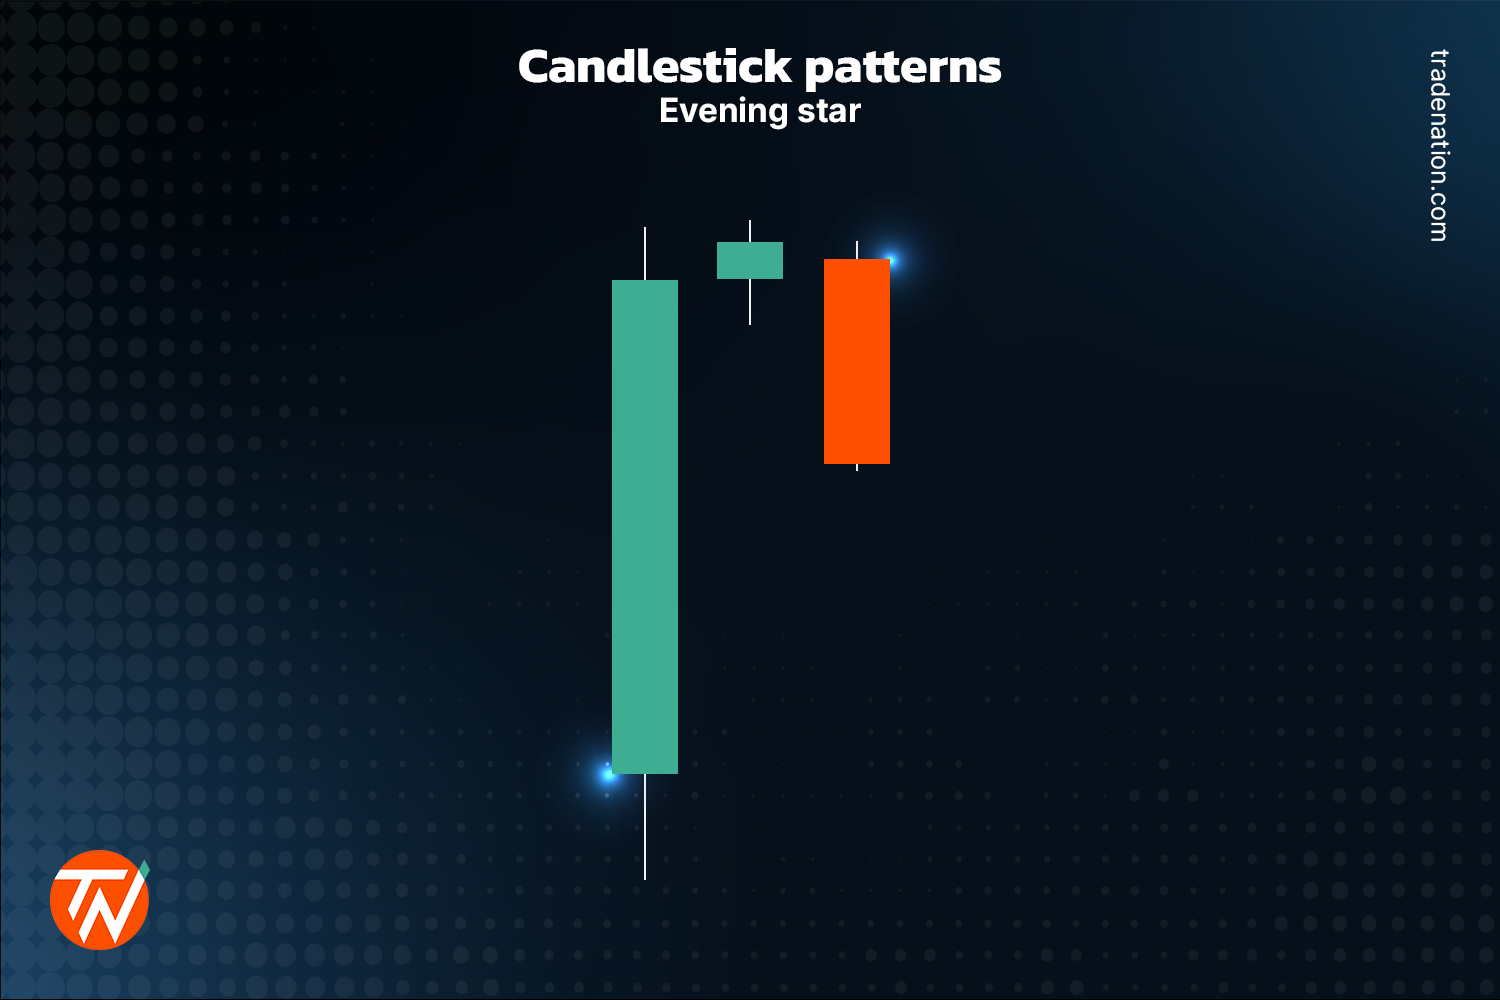 candlestick patterns evening star example in technical analysis